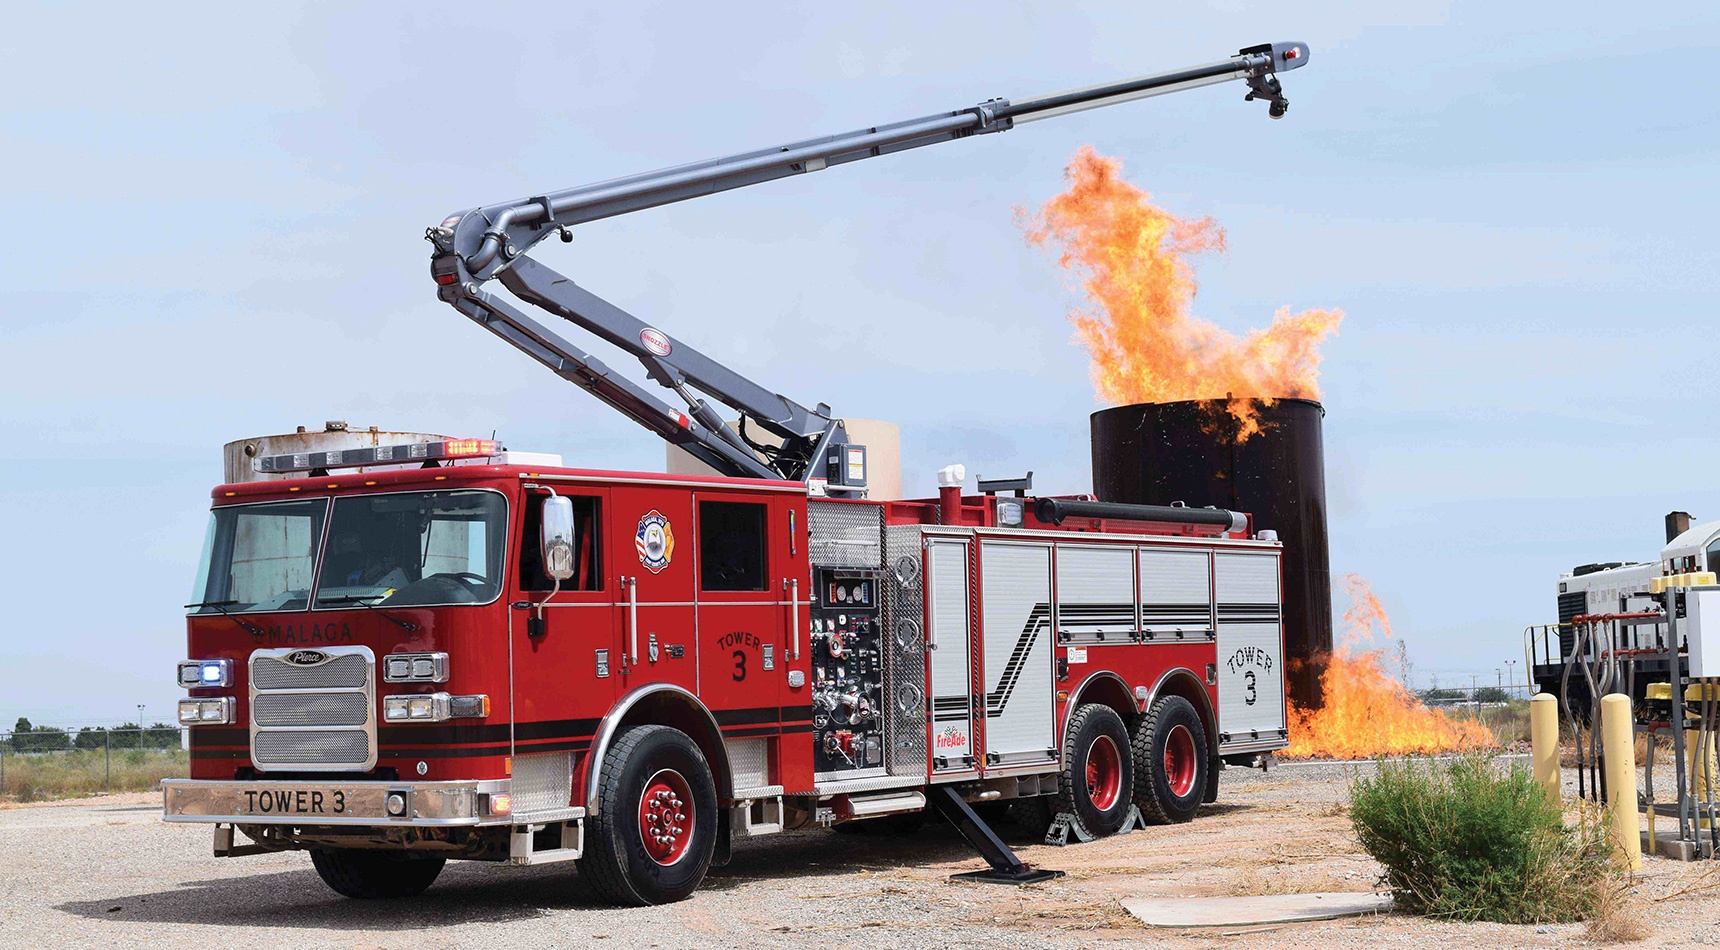 Pierce-Arrow-XT-with-Snozzle-High-Reach-Extendable-Turret-a-Game-Changer-for-New-Mexico-Fire-Department_Header.jpg